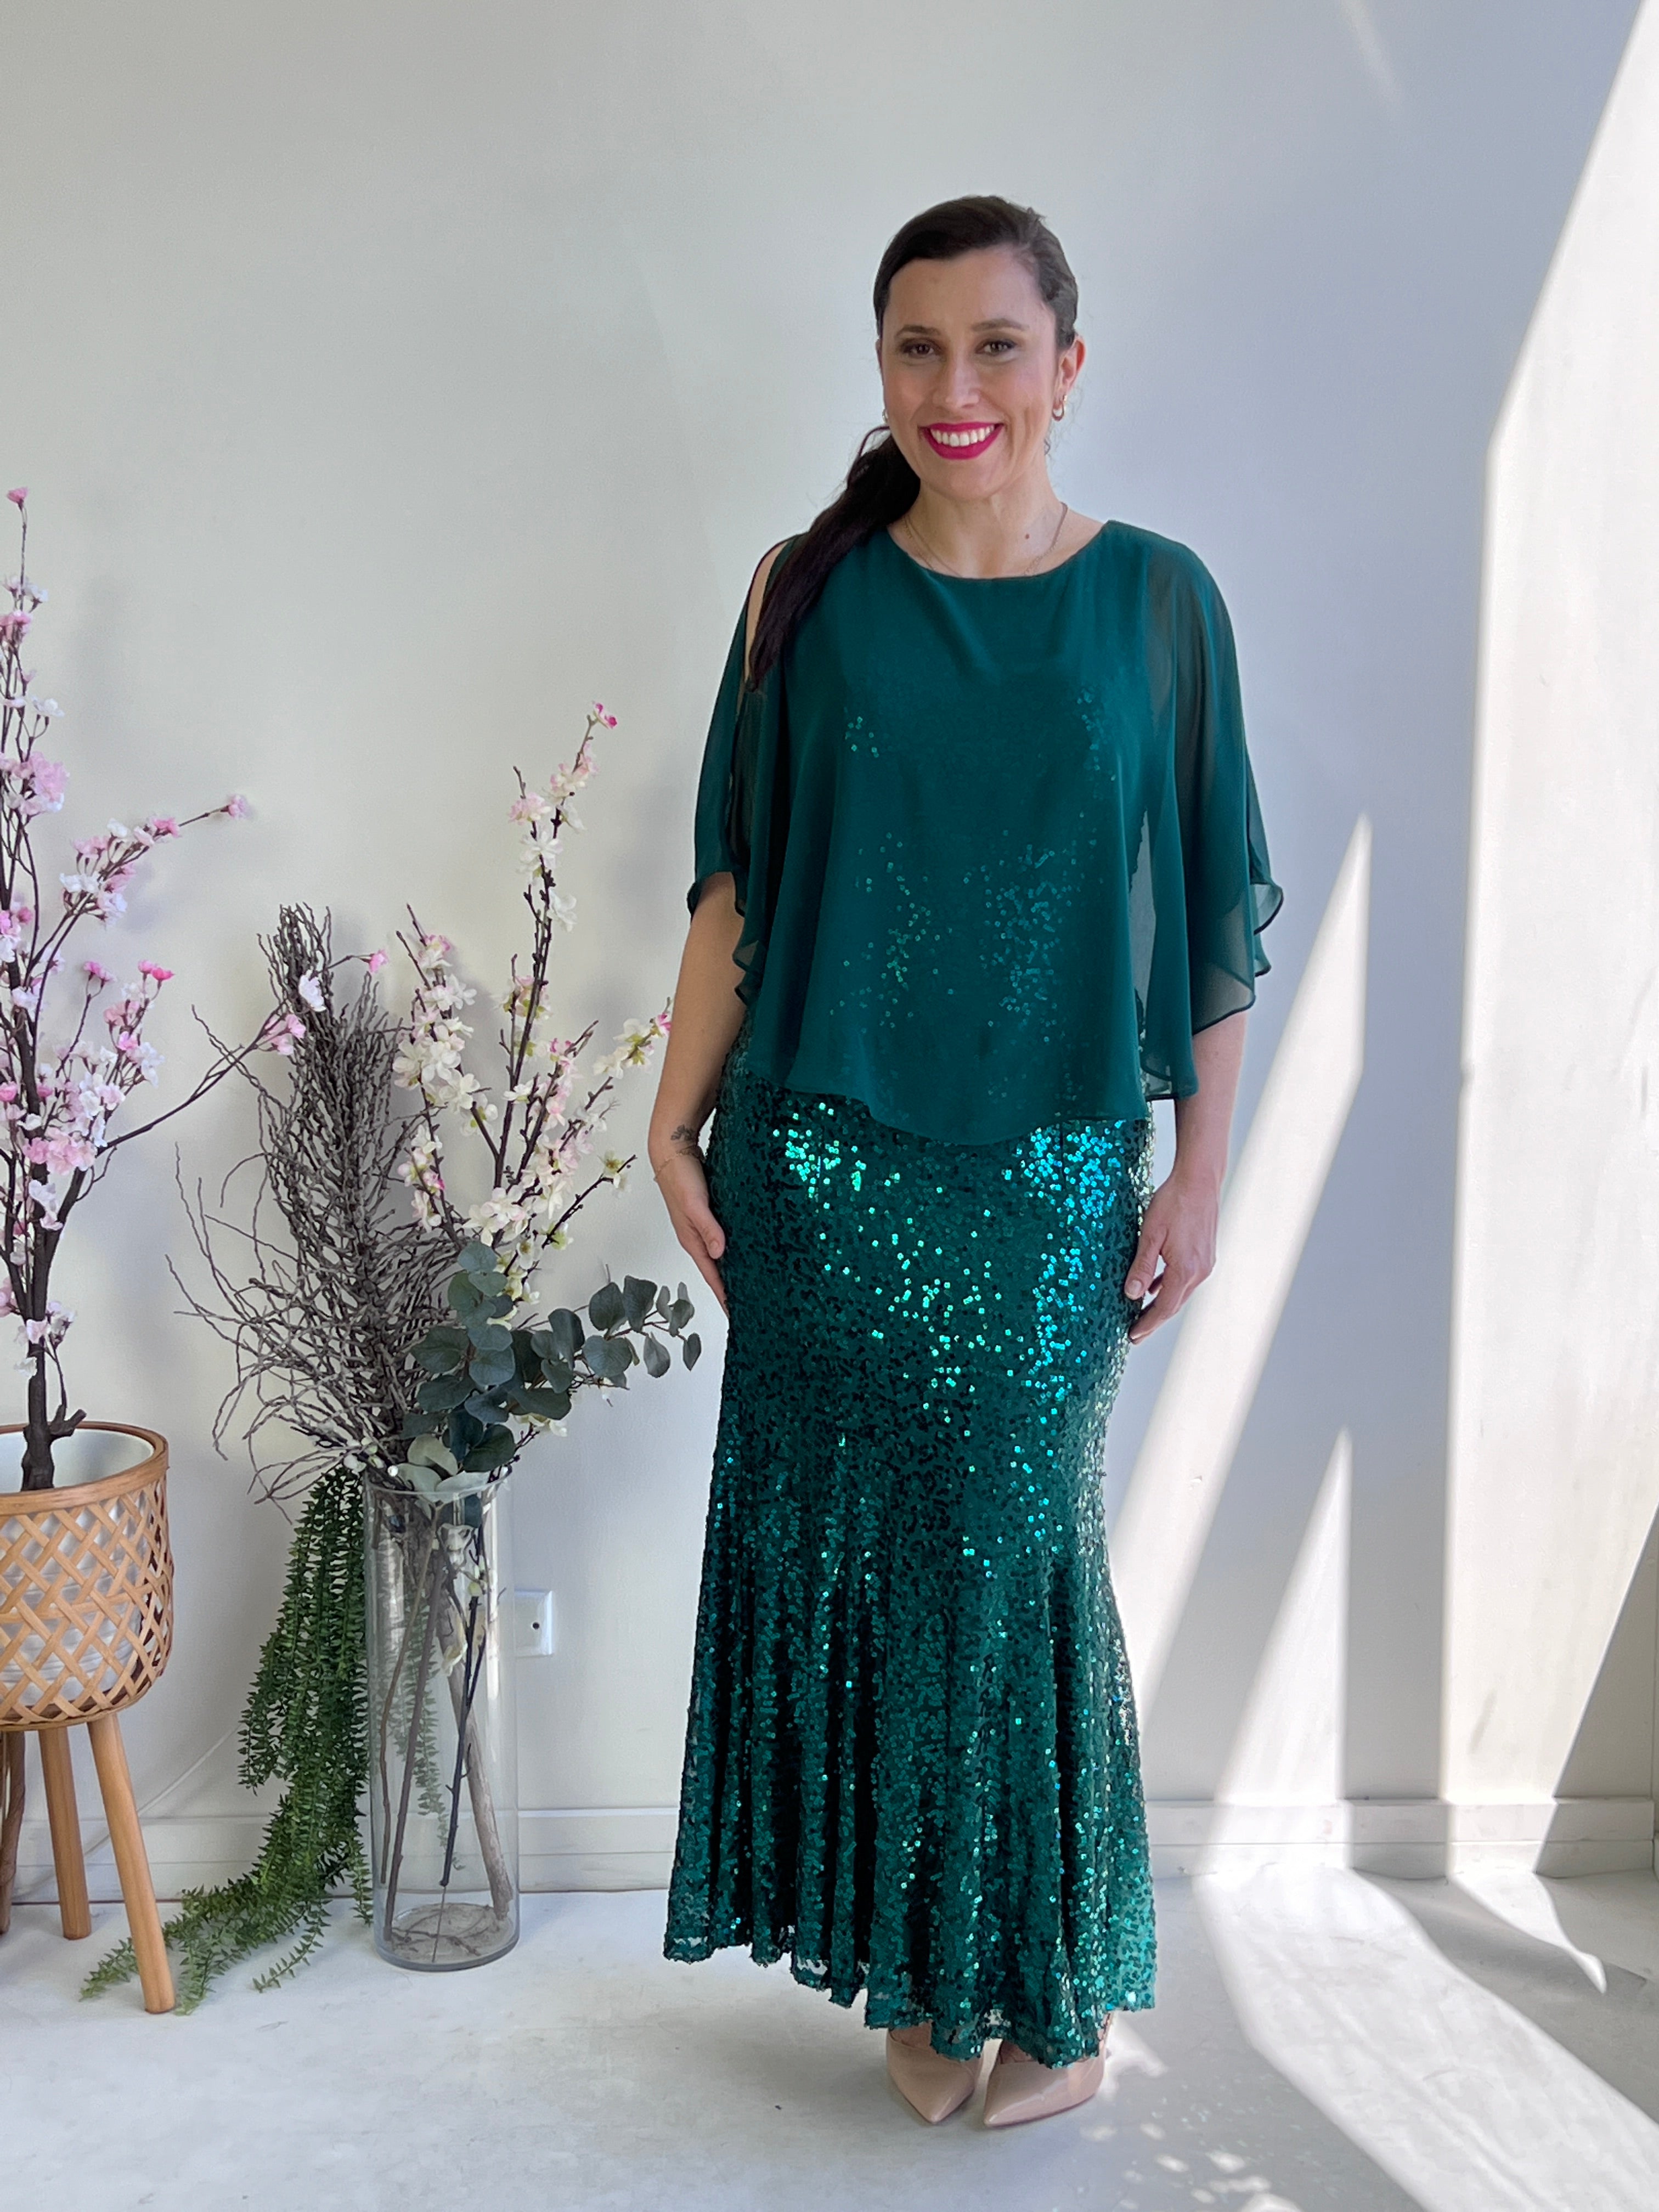 Emerald Green Long Sleeves Off The Shoulder Satin Lace Split Formal Dr –  Siaoryne